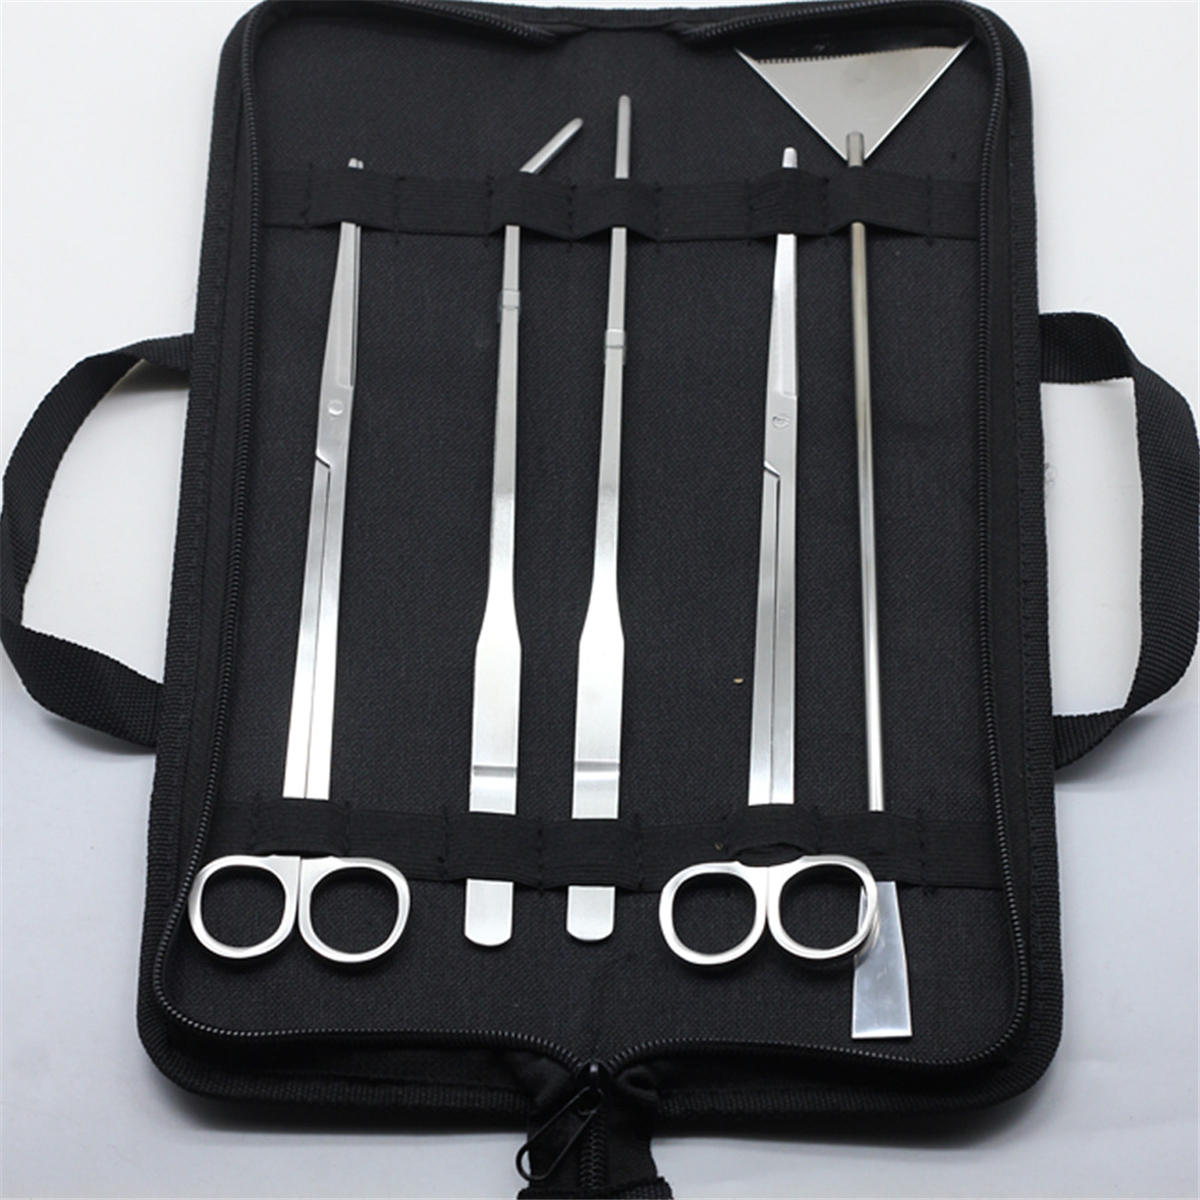 5Pcs-Stainless-Steel-Aquarium-Aquascaping-Tank-Aquatic-Plant-Fish-Cutter-Tweezers-Tool-with-Pouch-1378932-7